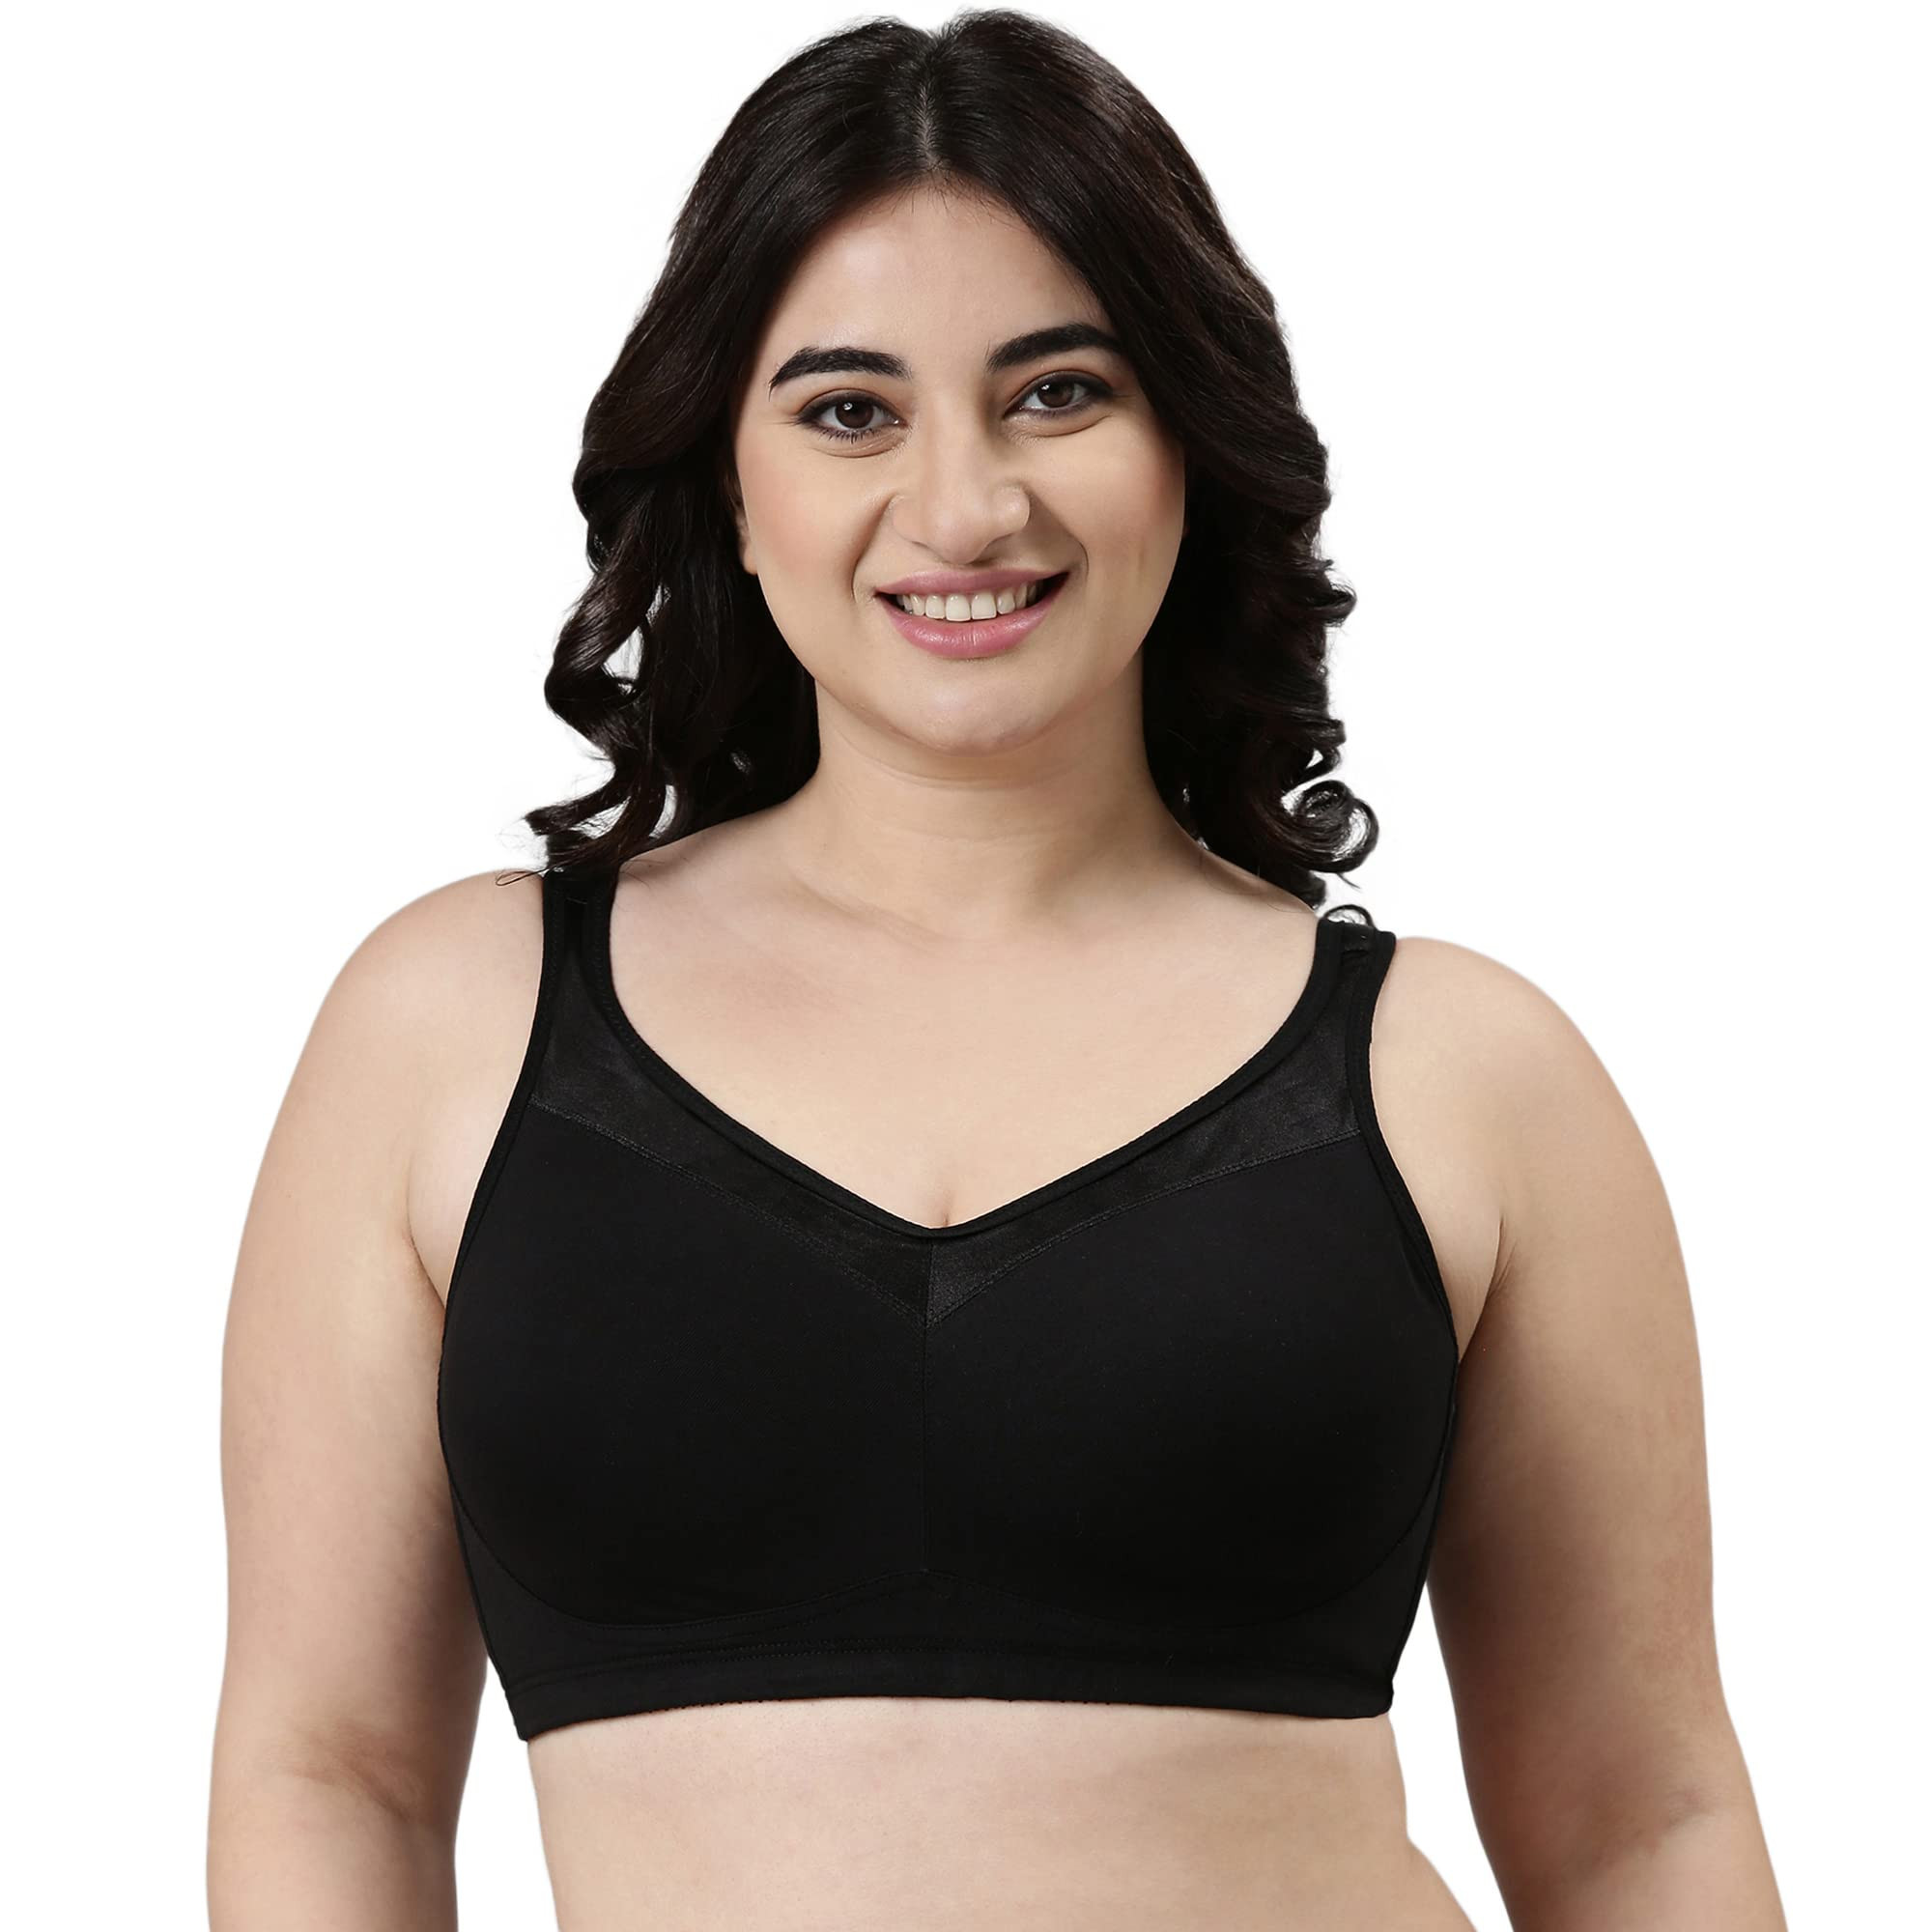 https://www.fastemi.com/uploads/fastemicom/products/enamor-a042-side-supportshaperstretchcotton-everyday-bra---non-paddedwire-freeamp-high-coveragesize--32d-577412312706800_l.jpg